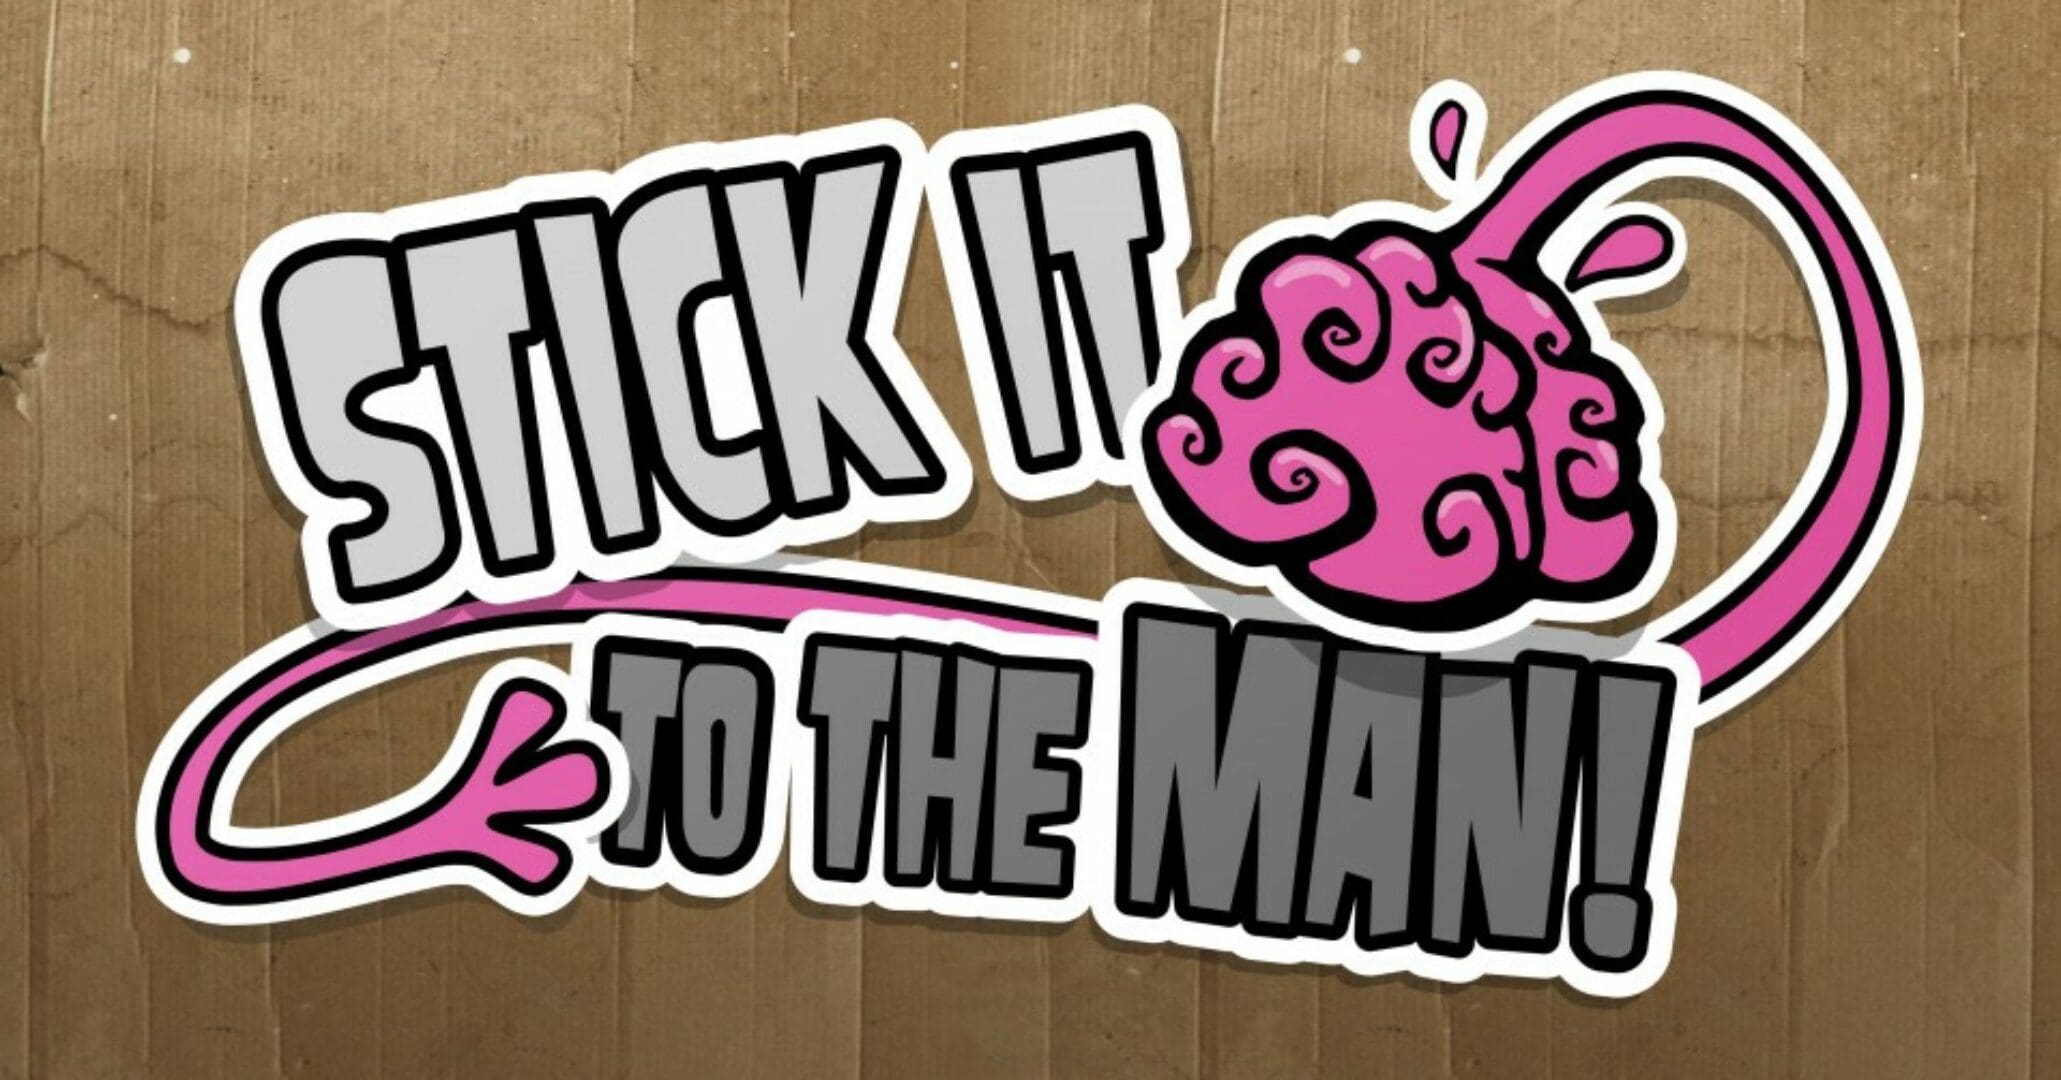 Review: Stick it to the Man (Wii U)